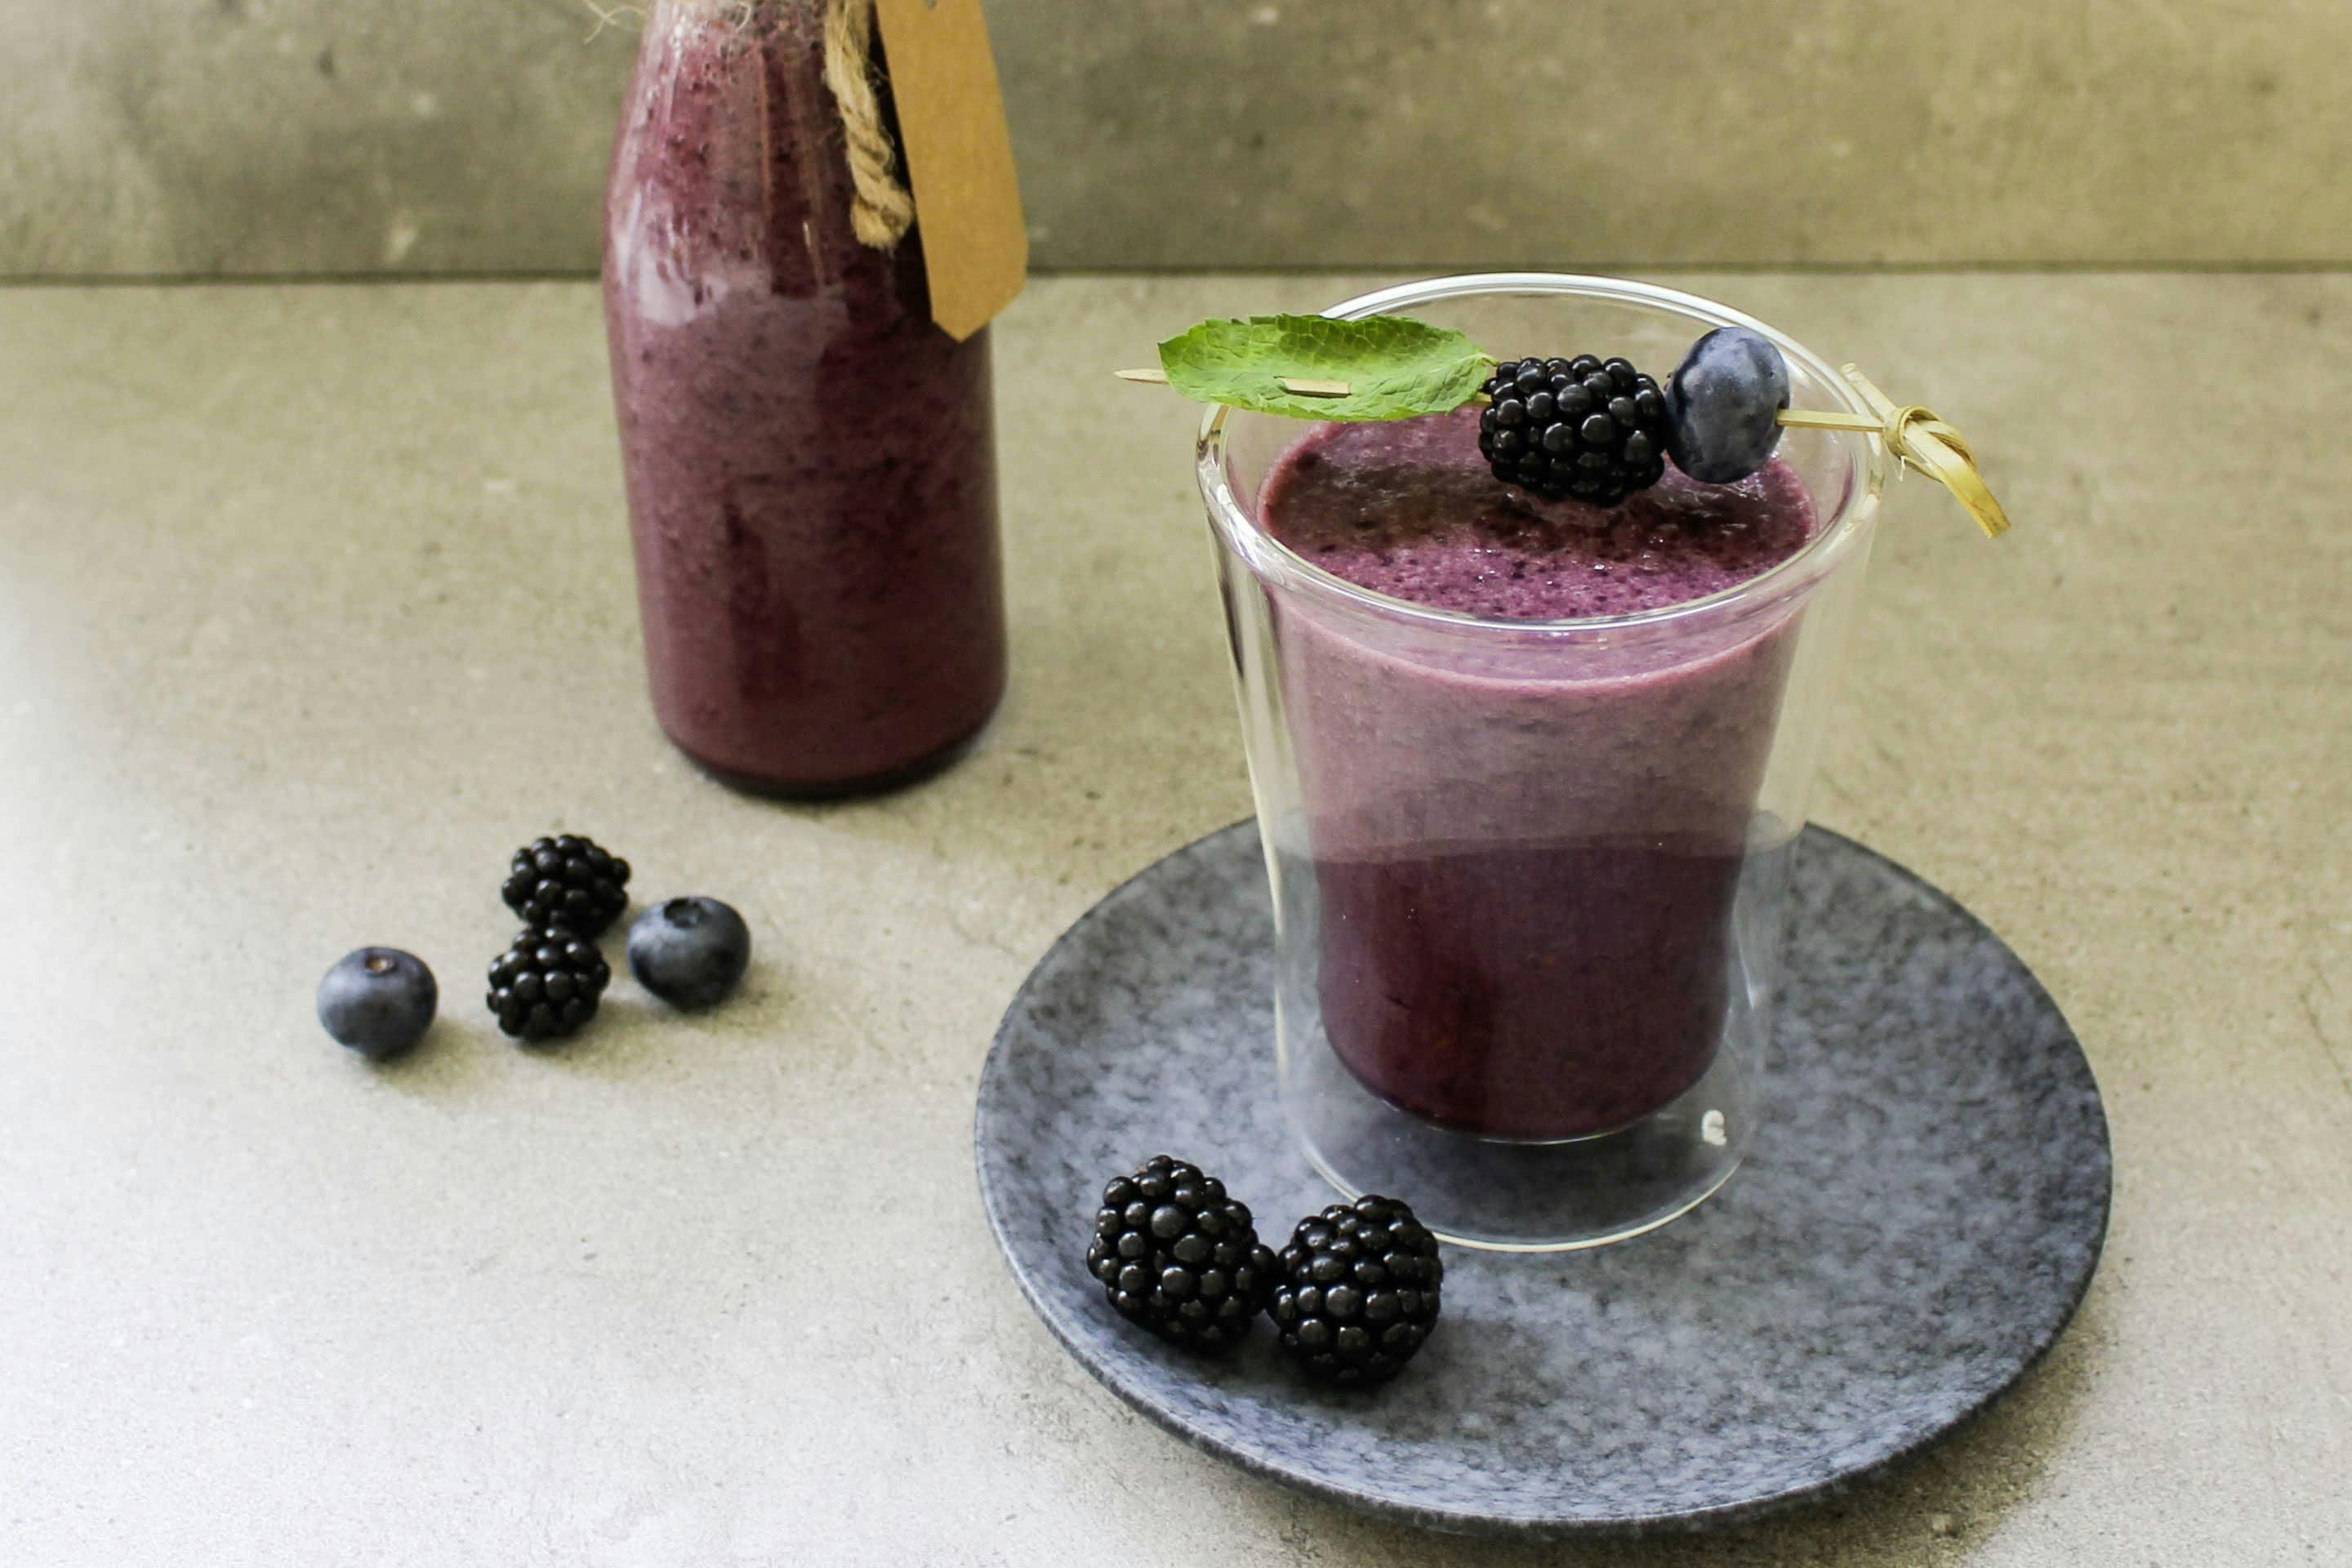 Blackberry and banana shake in a glass and a bottle garnished with fresh berries